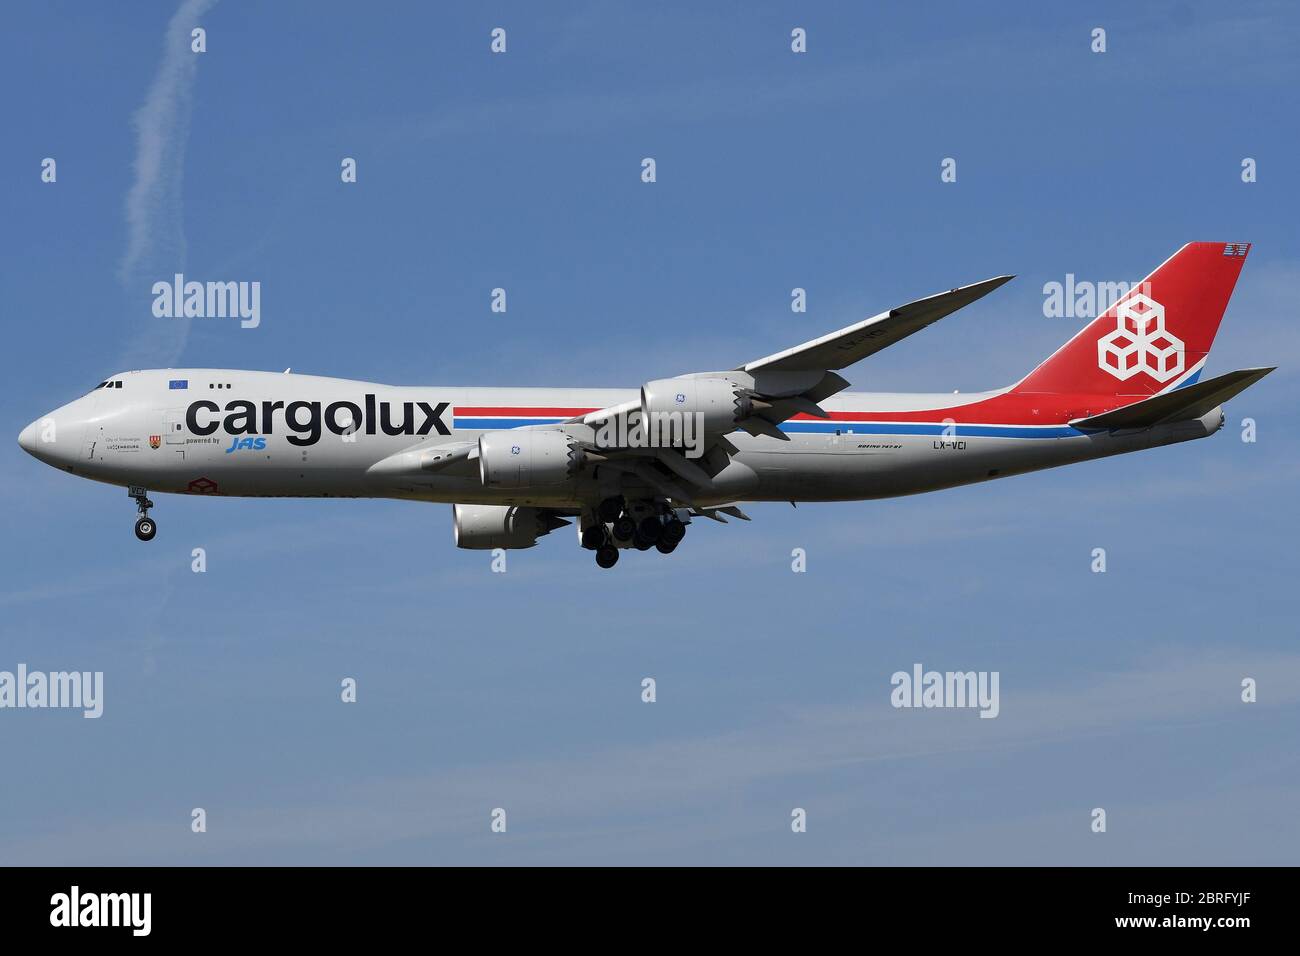 DELIVERING PPE WORLDWIDE. CARGOLUX BOEING 747-8F LX-VCI. Stock Photo